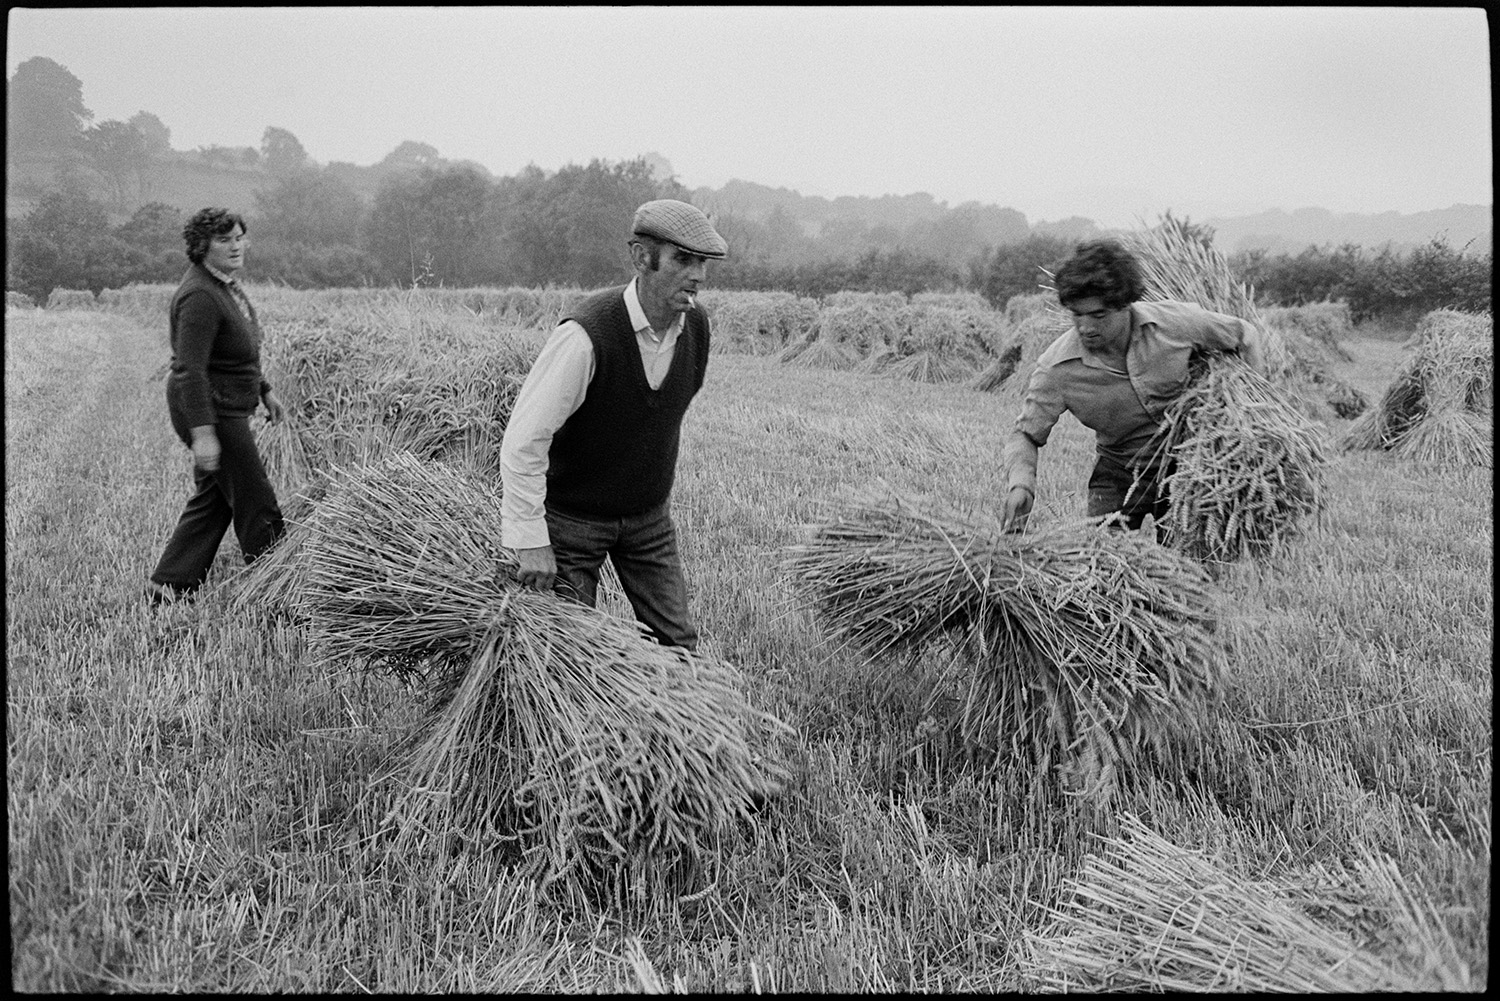 Farmers, women setting up stooks. 
[Eileen Squire, on the left; Irwin Piper, in the centre and Stephen Squire, on the right, setting up stooks of corn in a field at Chapple. Dolton.]